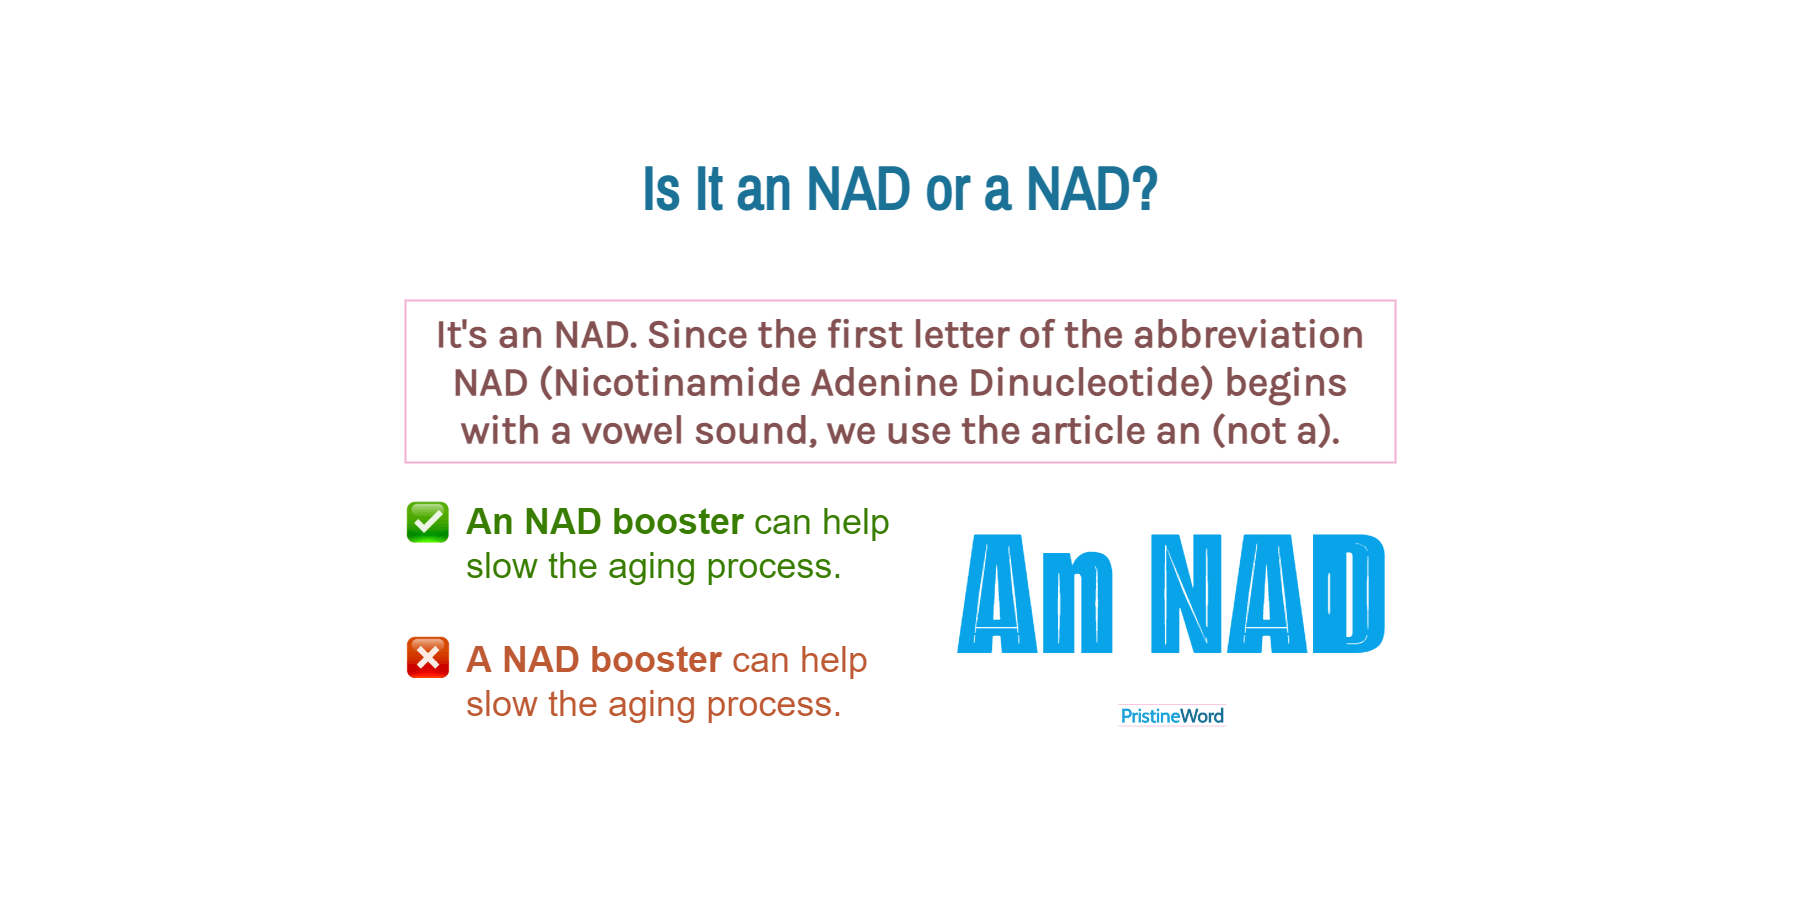 Is It an NAD or a NAD?